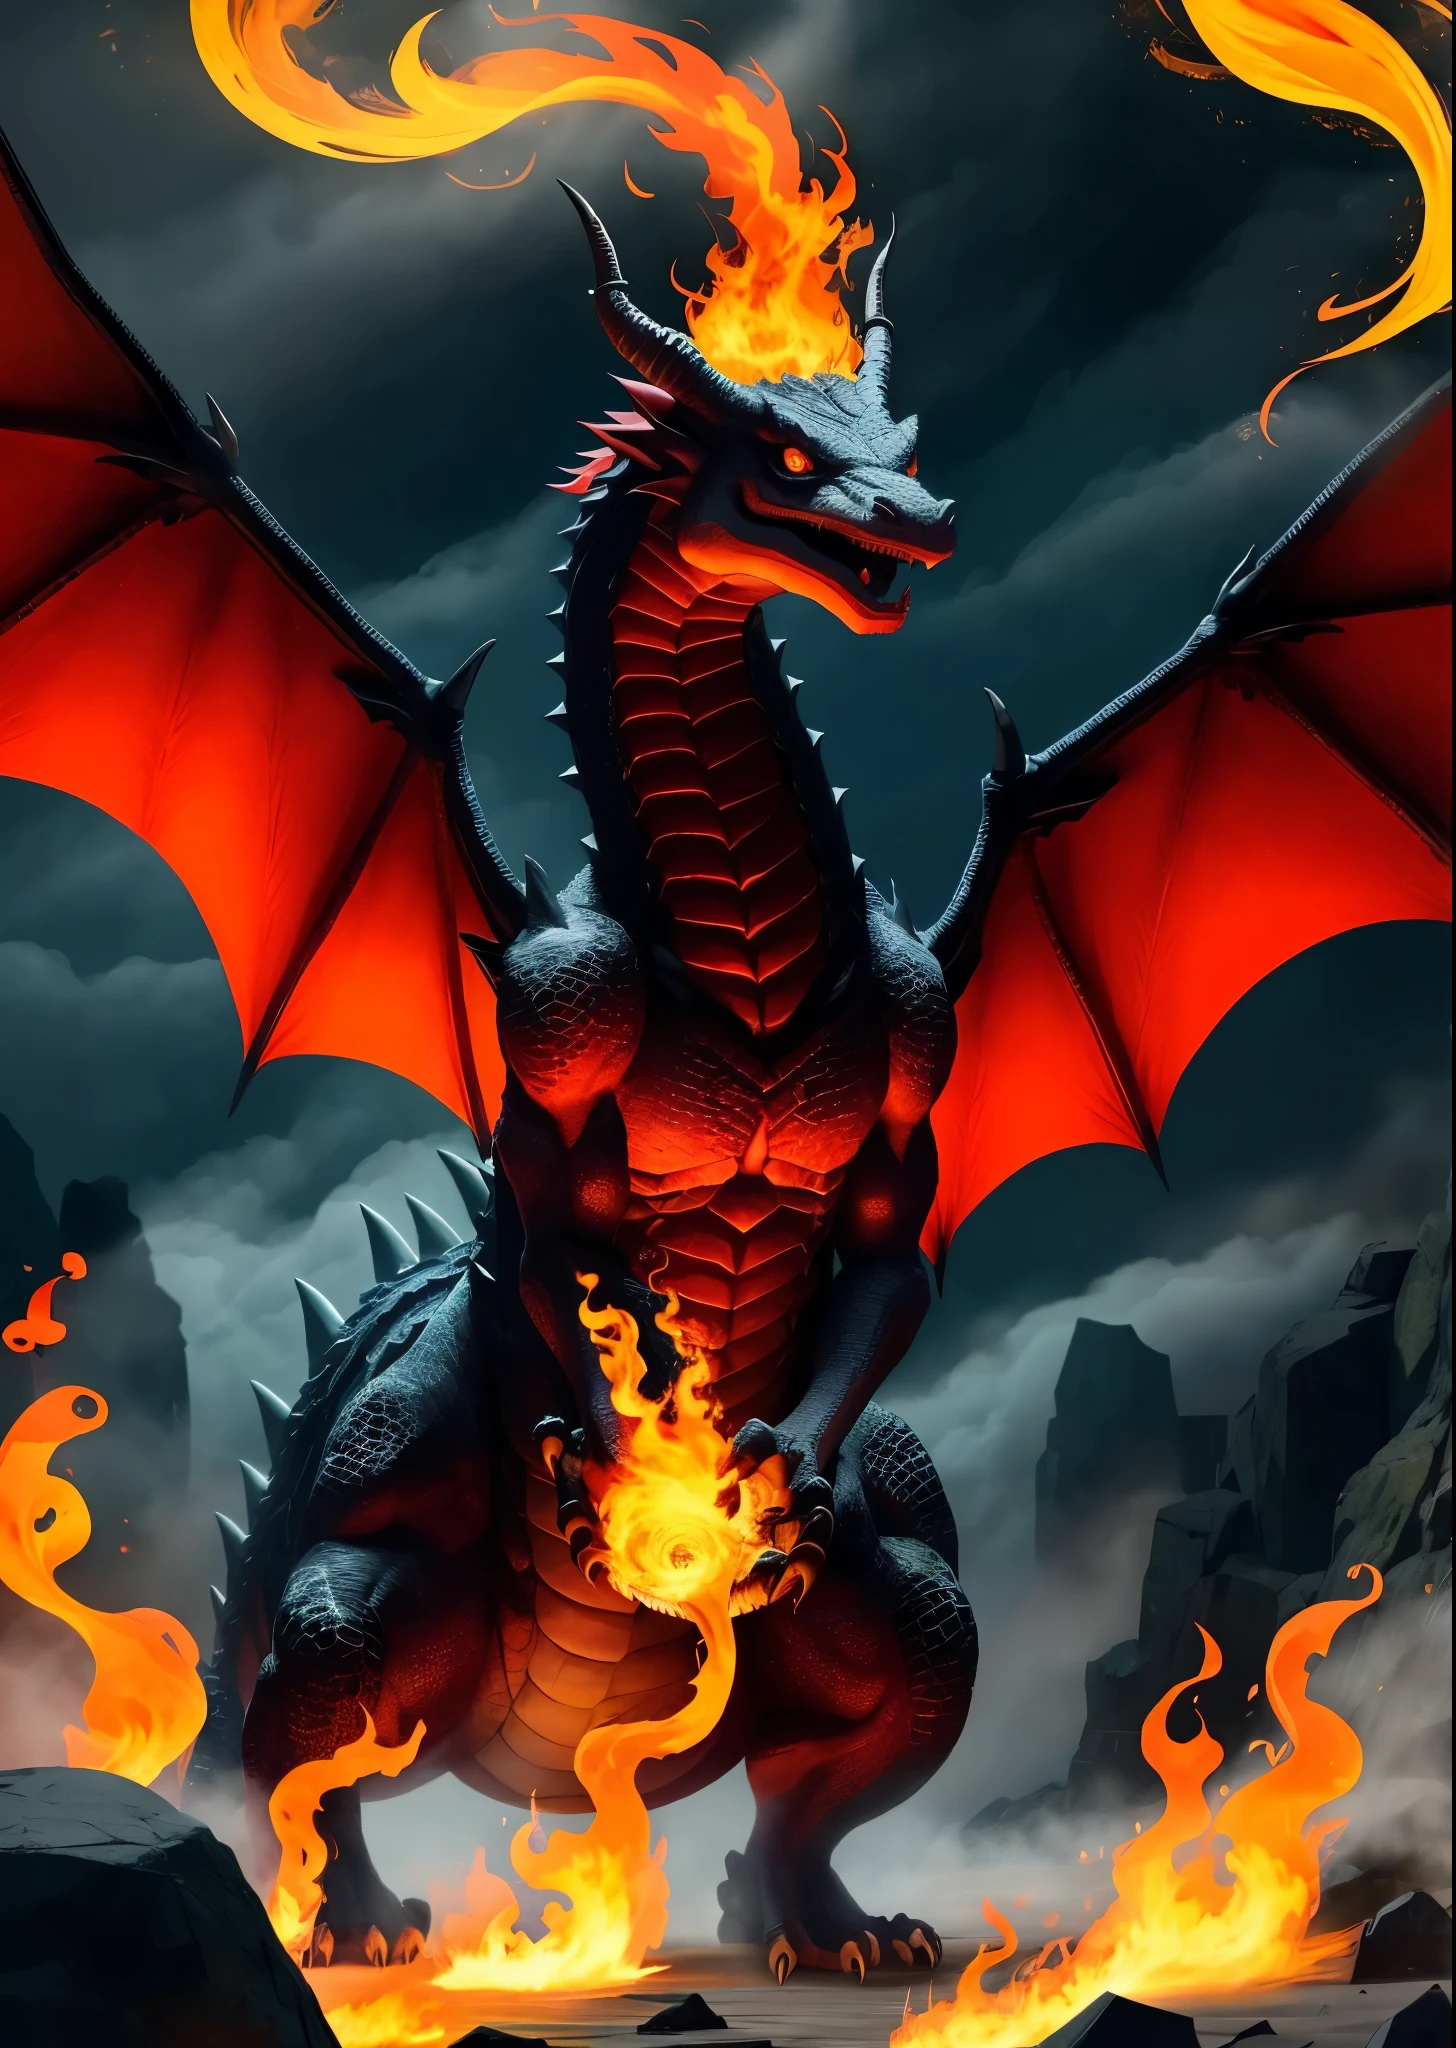 there is a statue of a dragon with flames on it, fire flaming dragon serpent, dragon made out of molten lava, fire dragon, dragon breathing fire, dragon in the background, dragon blowing fire above, fire breathing dragon, “fire breathing dragon, the devil in hell as a dragon, ''dragon breathing fire, firebreathing dragon, dragon head, portrait of a dragon